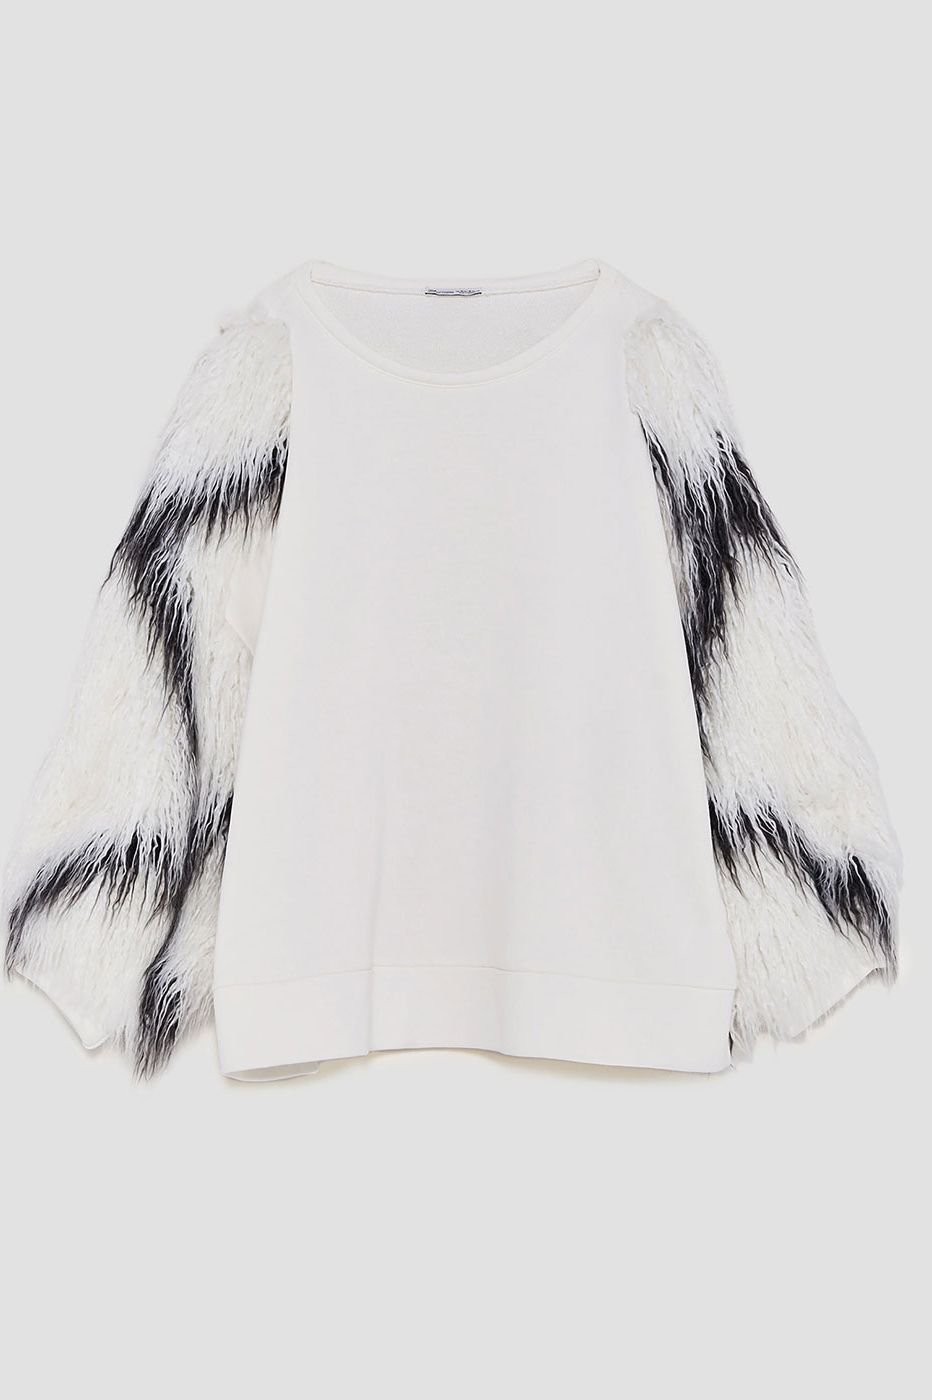 White, Clothing, Fur, Sleeve, Outerwear, Textile, Neck, Black-and-white, Top, Feather, 